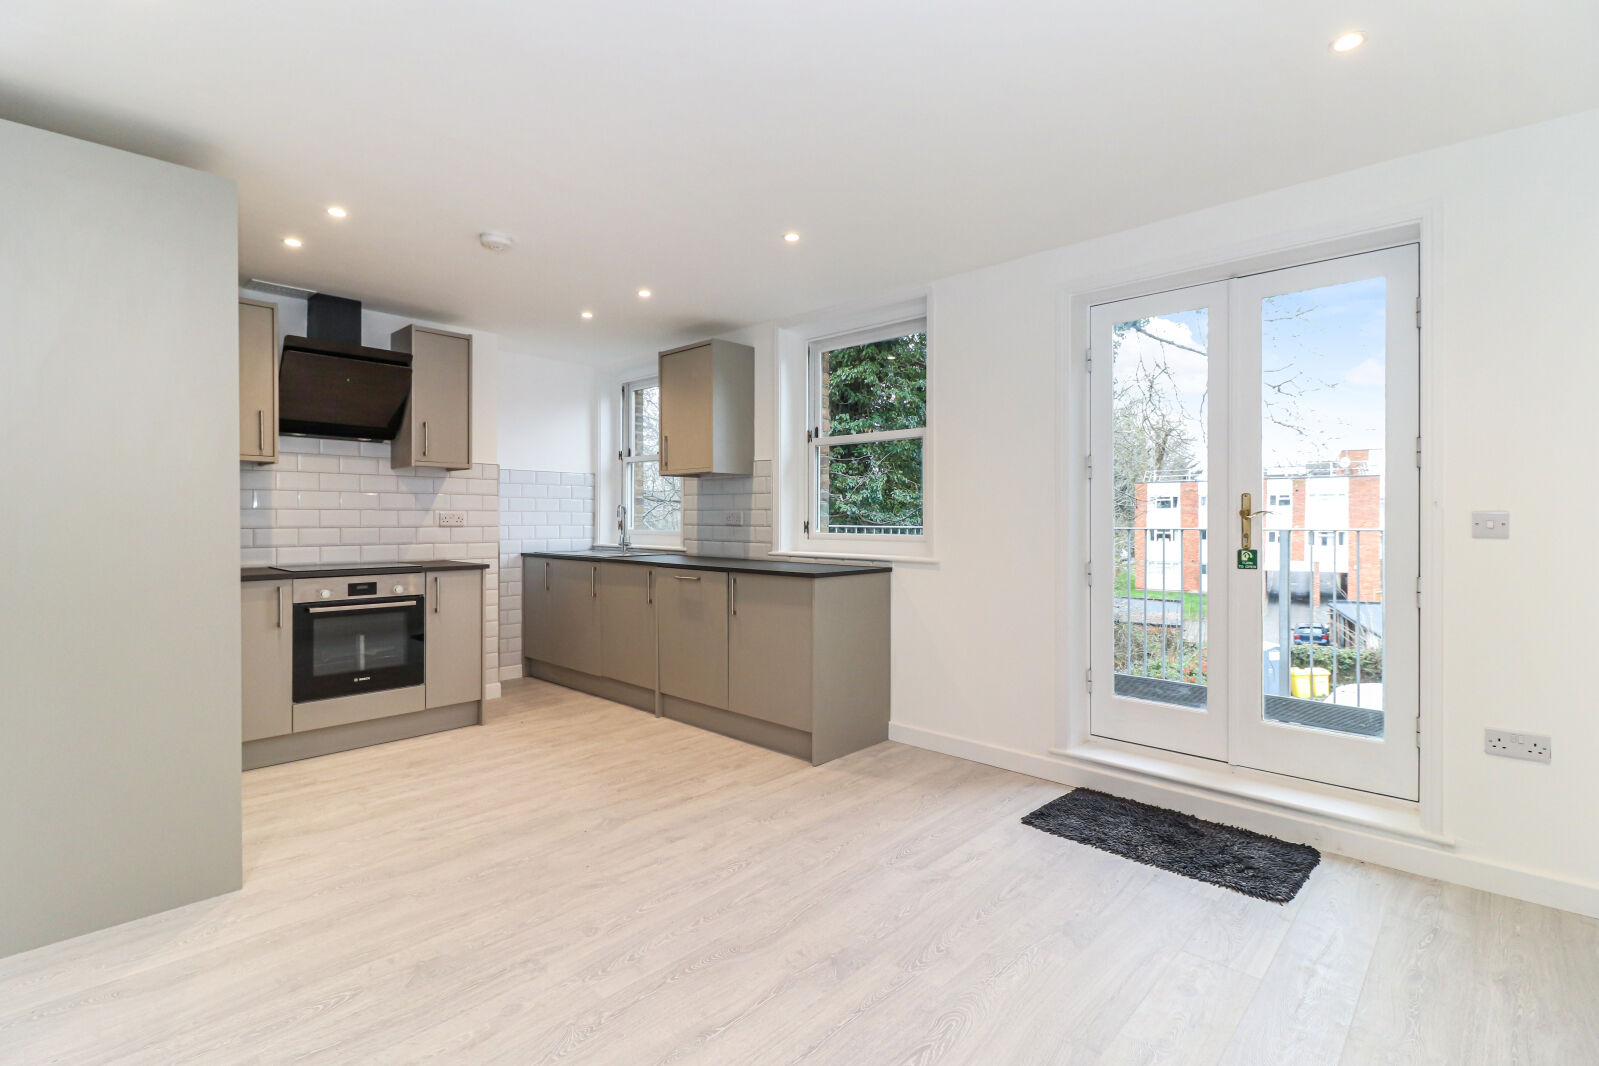 2 bedroom  flat for sale Amersham Hill, High Wycombe, HP13, main image